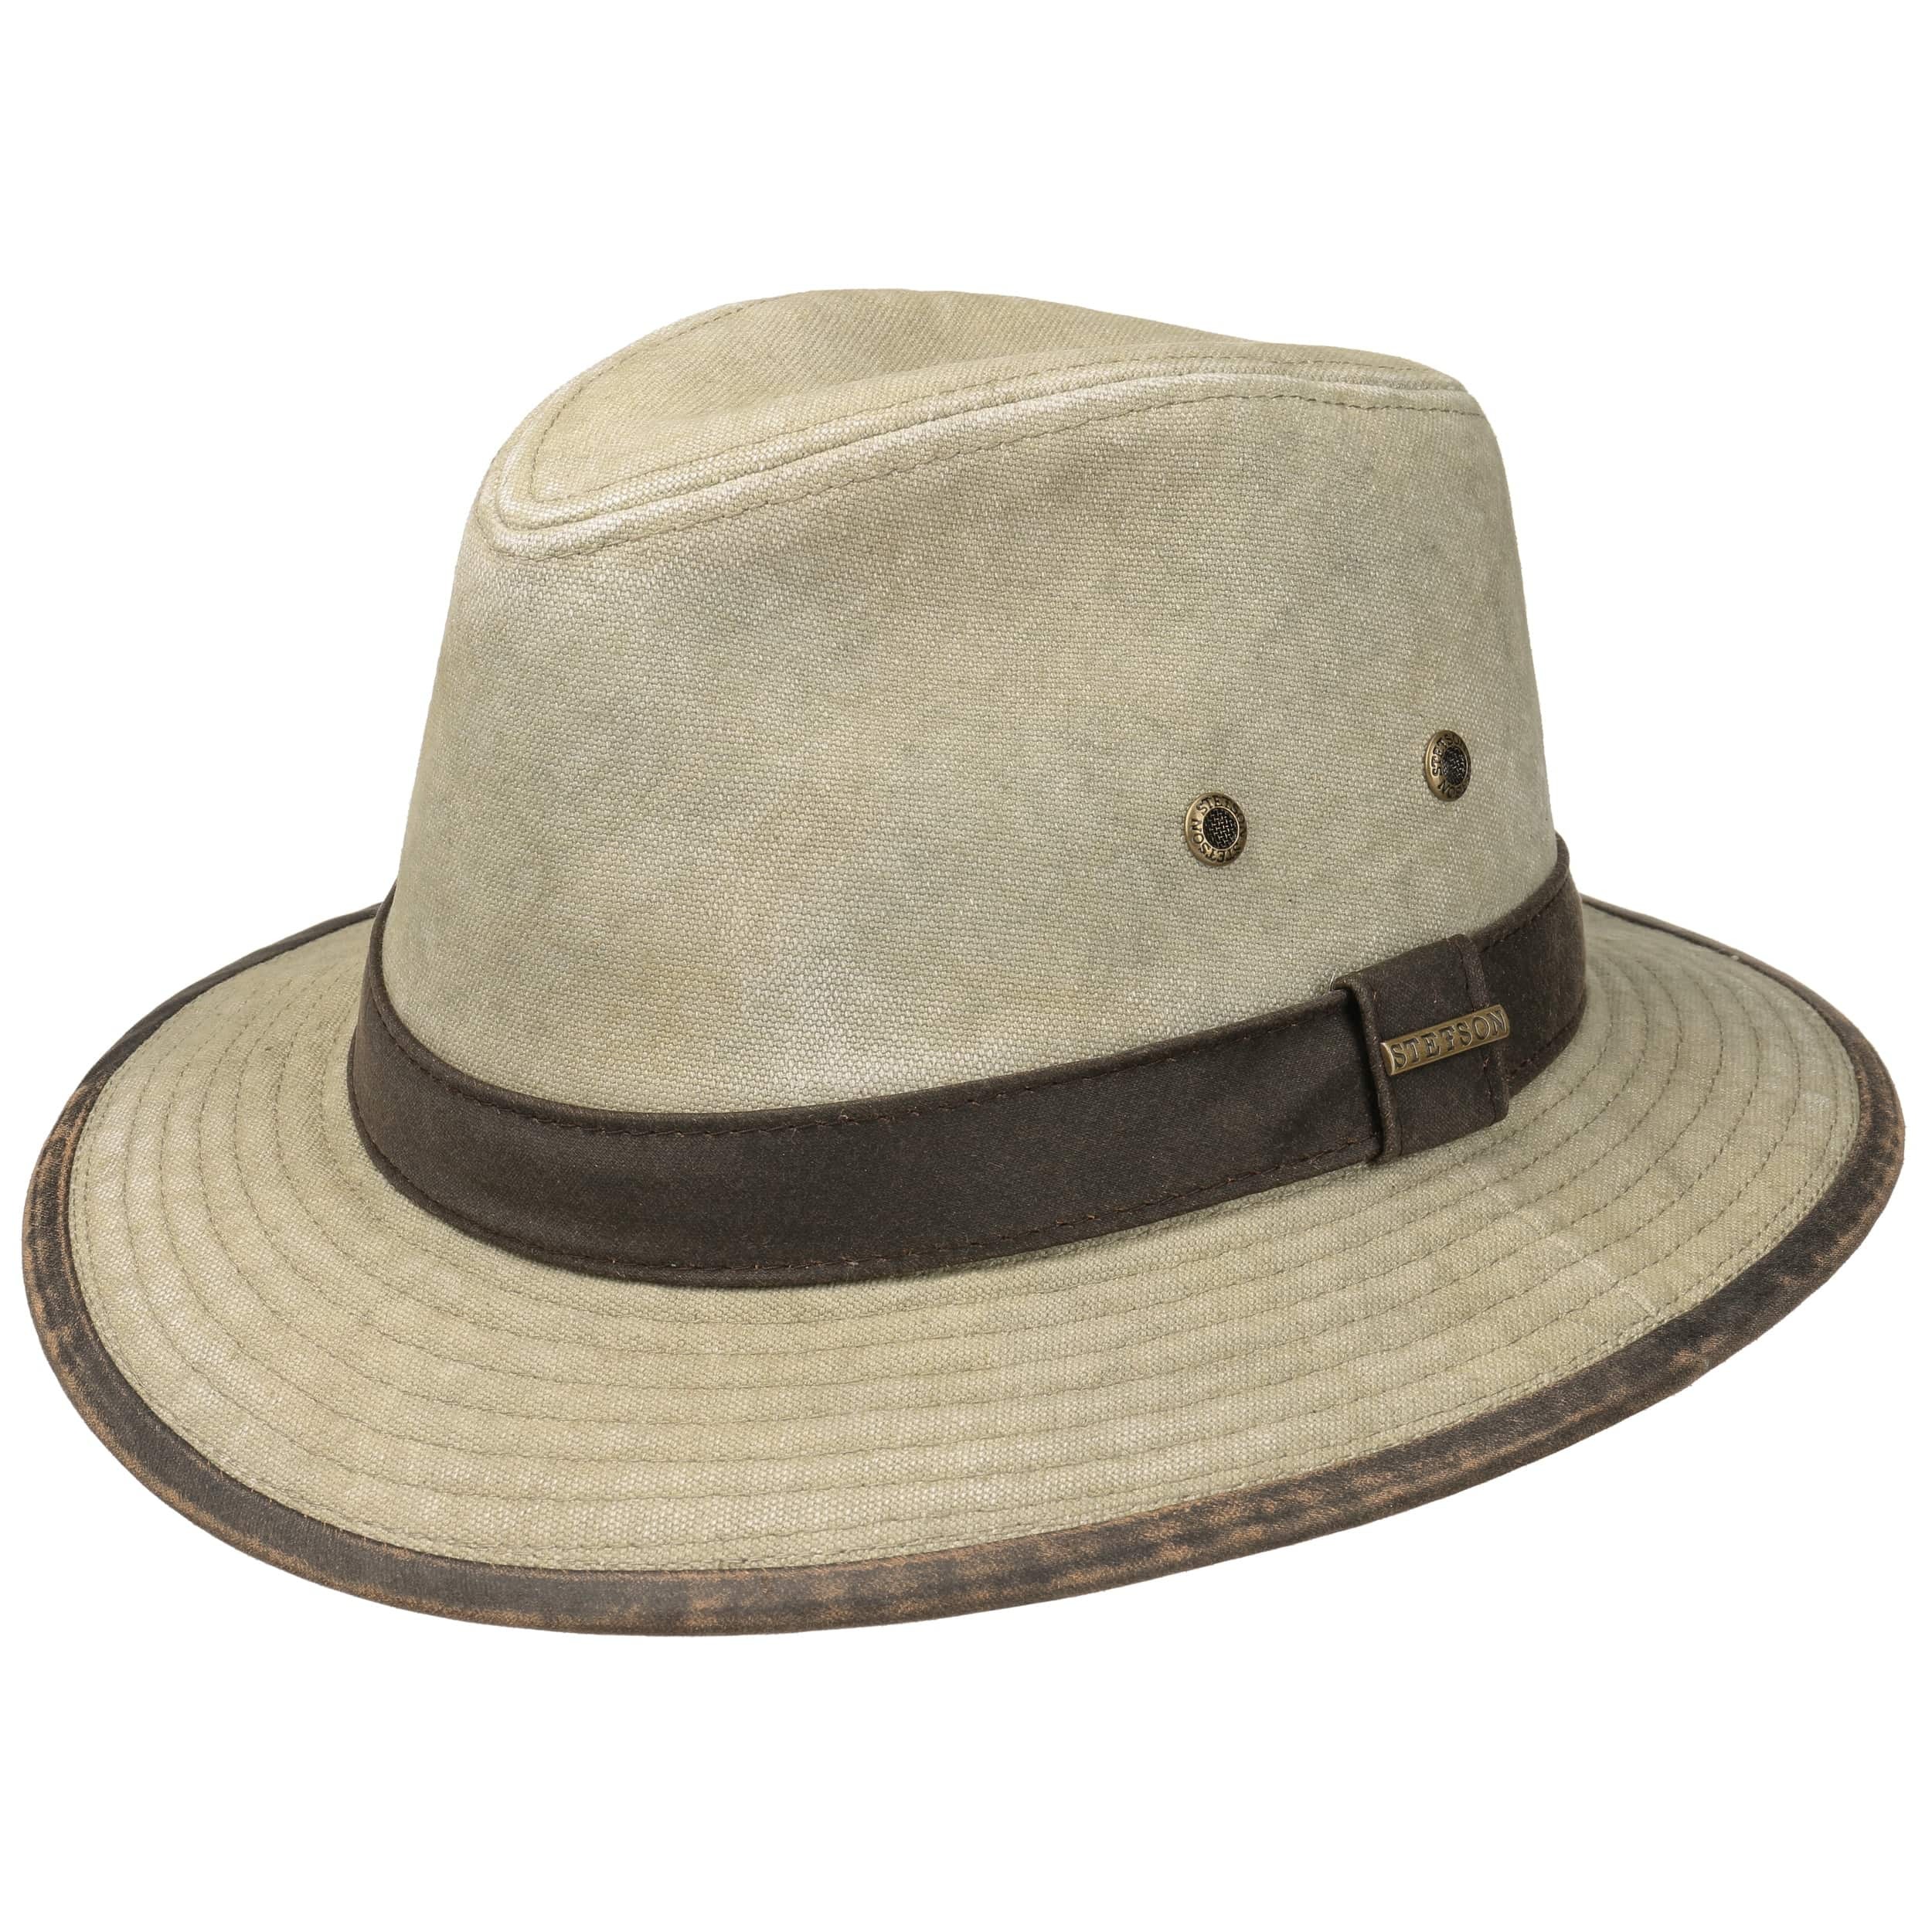 Ralento Cotton Traveller Hat by Stetson - 69,00